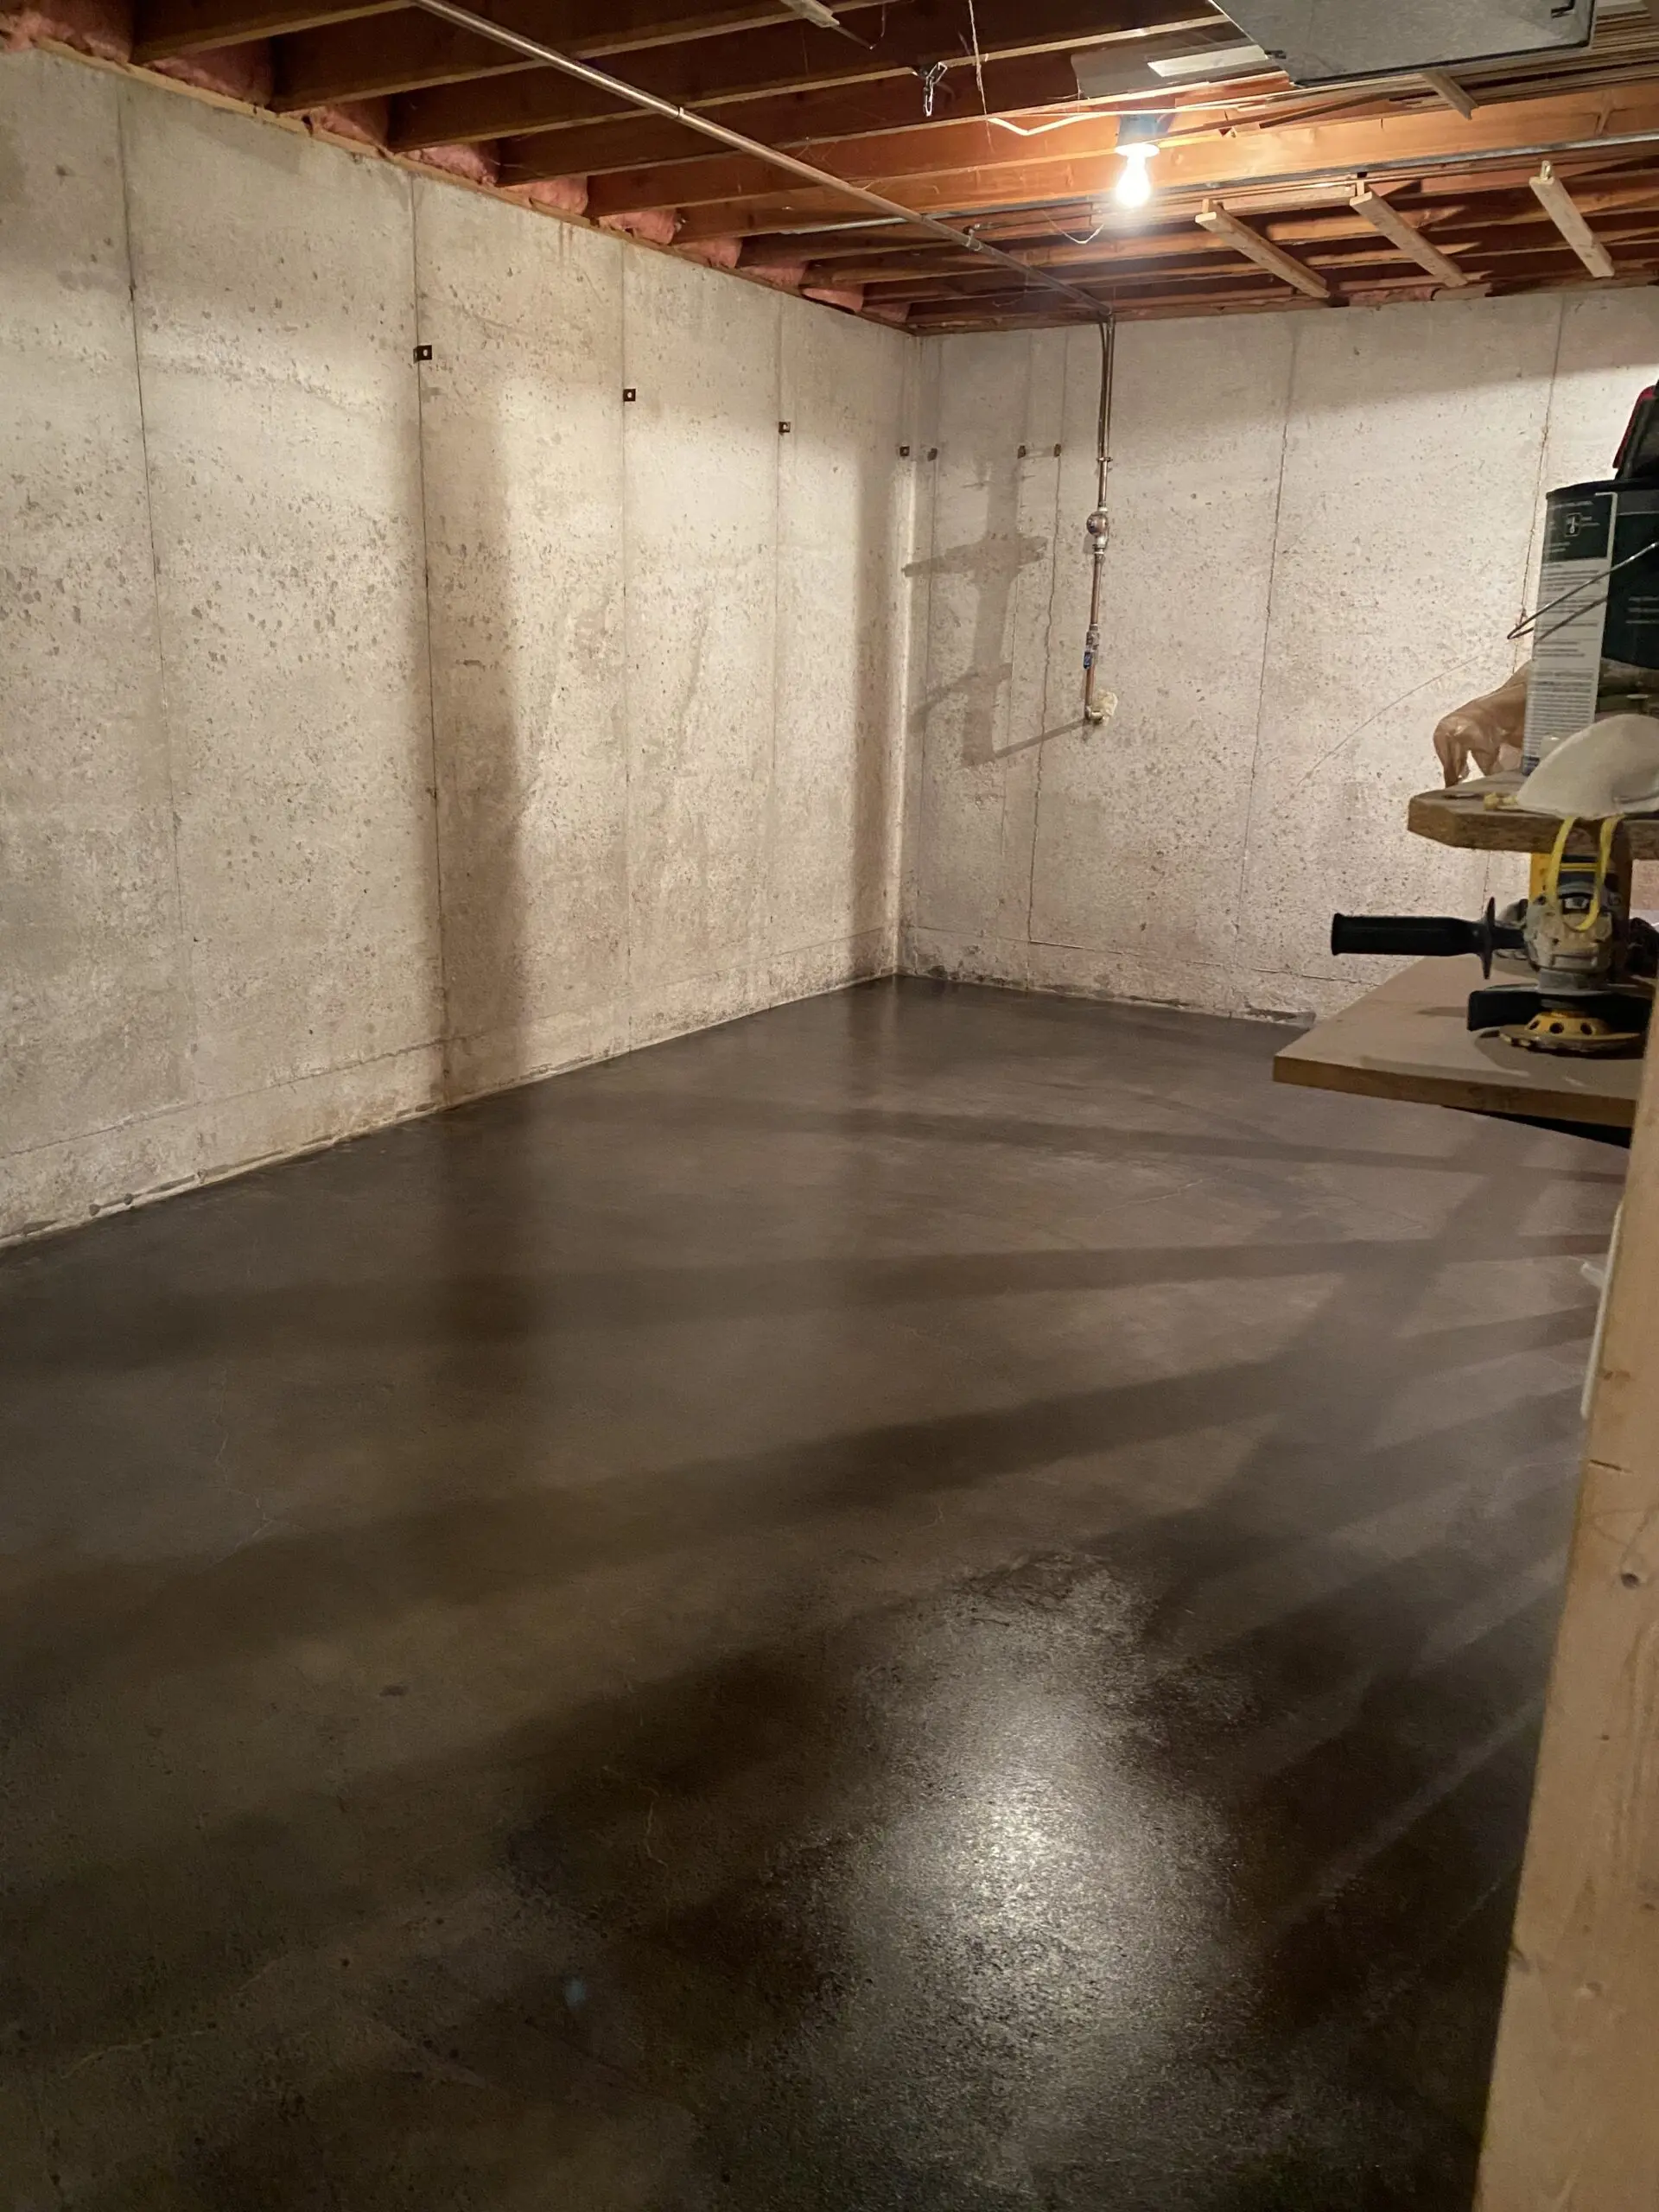 Alternate angle of the transformed basement floor with the natural, nuanced effect of Charcoal AcquaTint